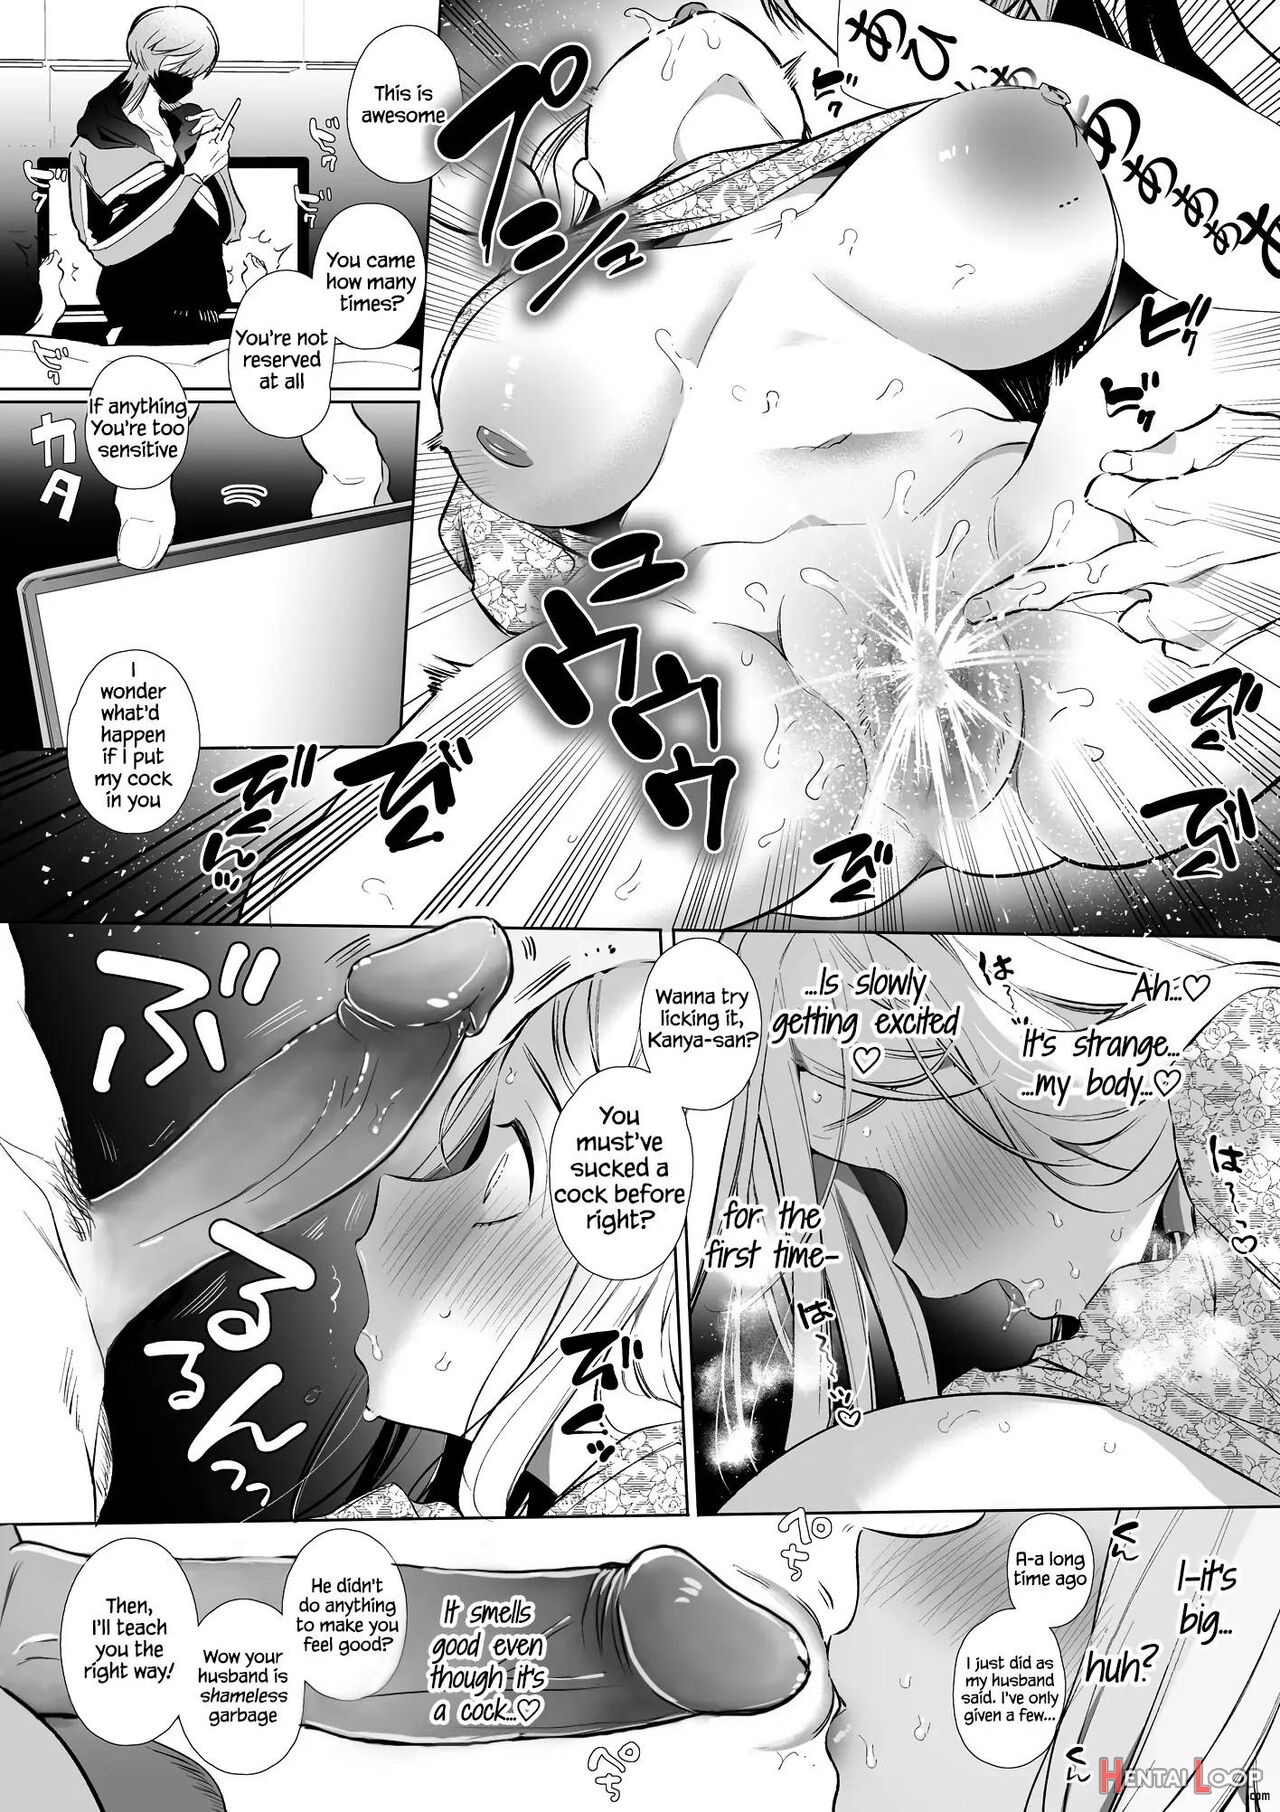 Kana-san Ntr ~ Degradation Of A Housewife By A Guy In An Alter Account ~ page 26